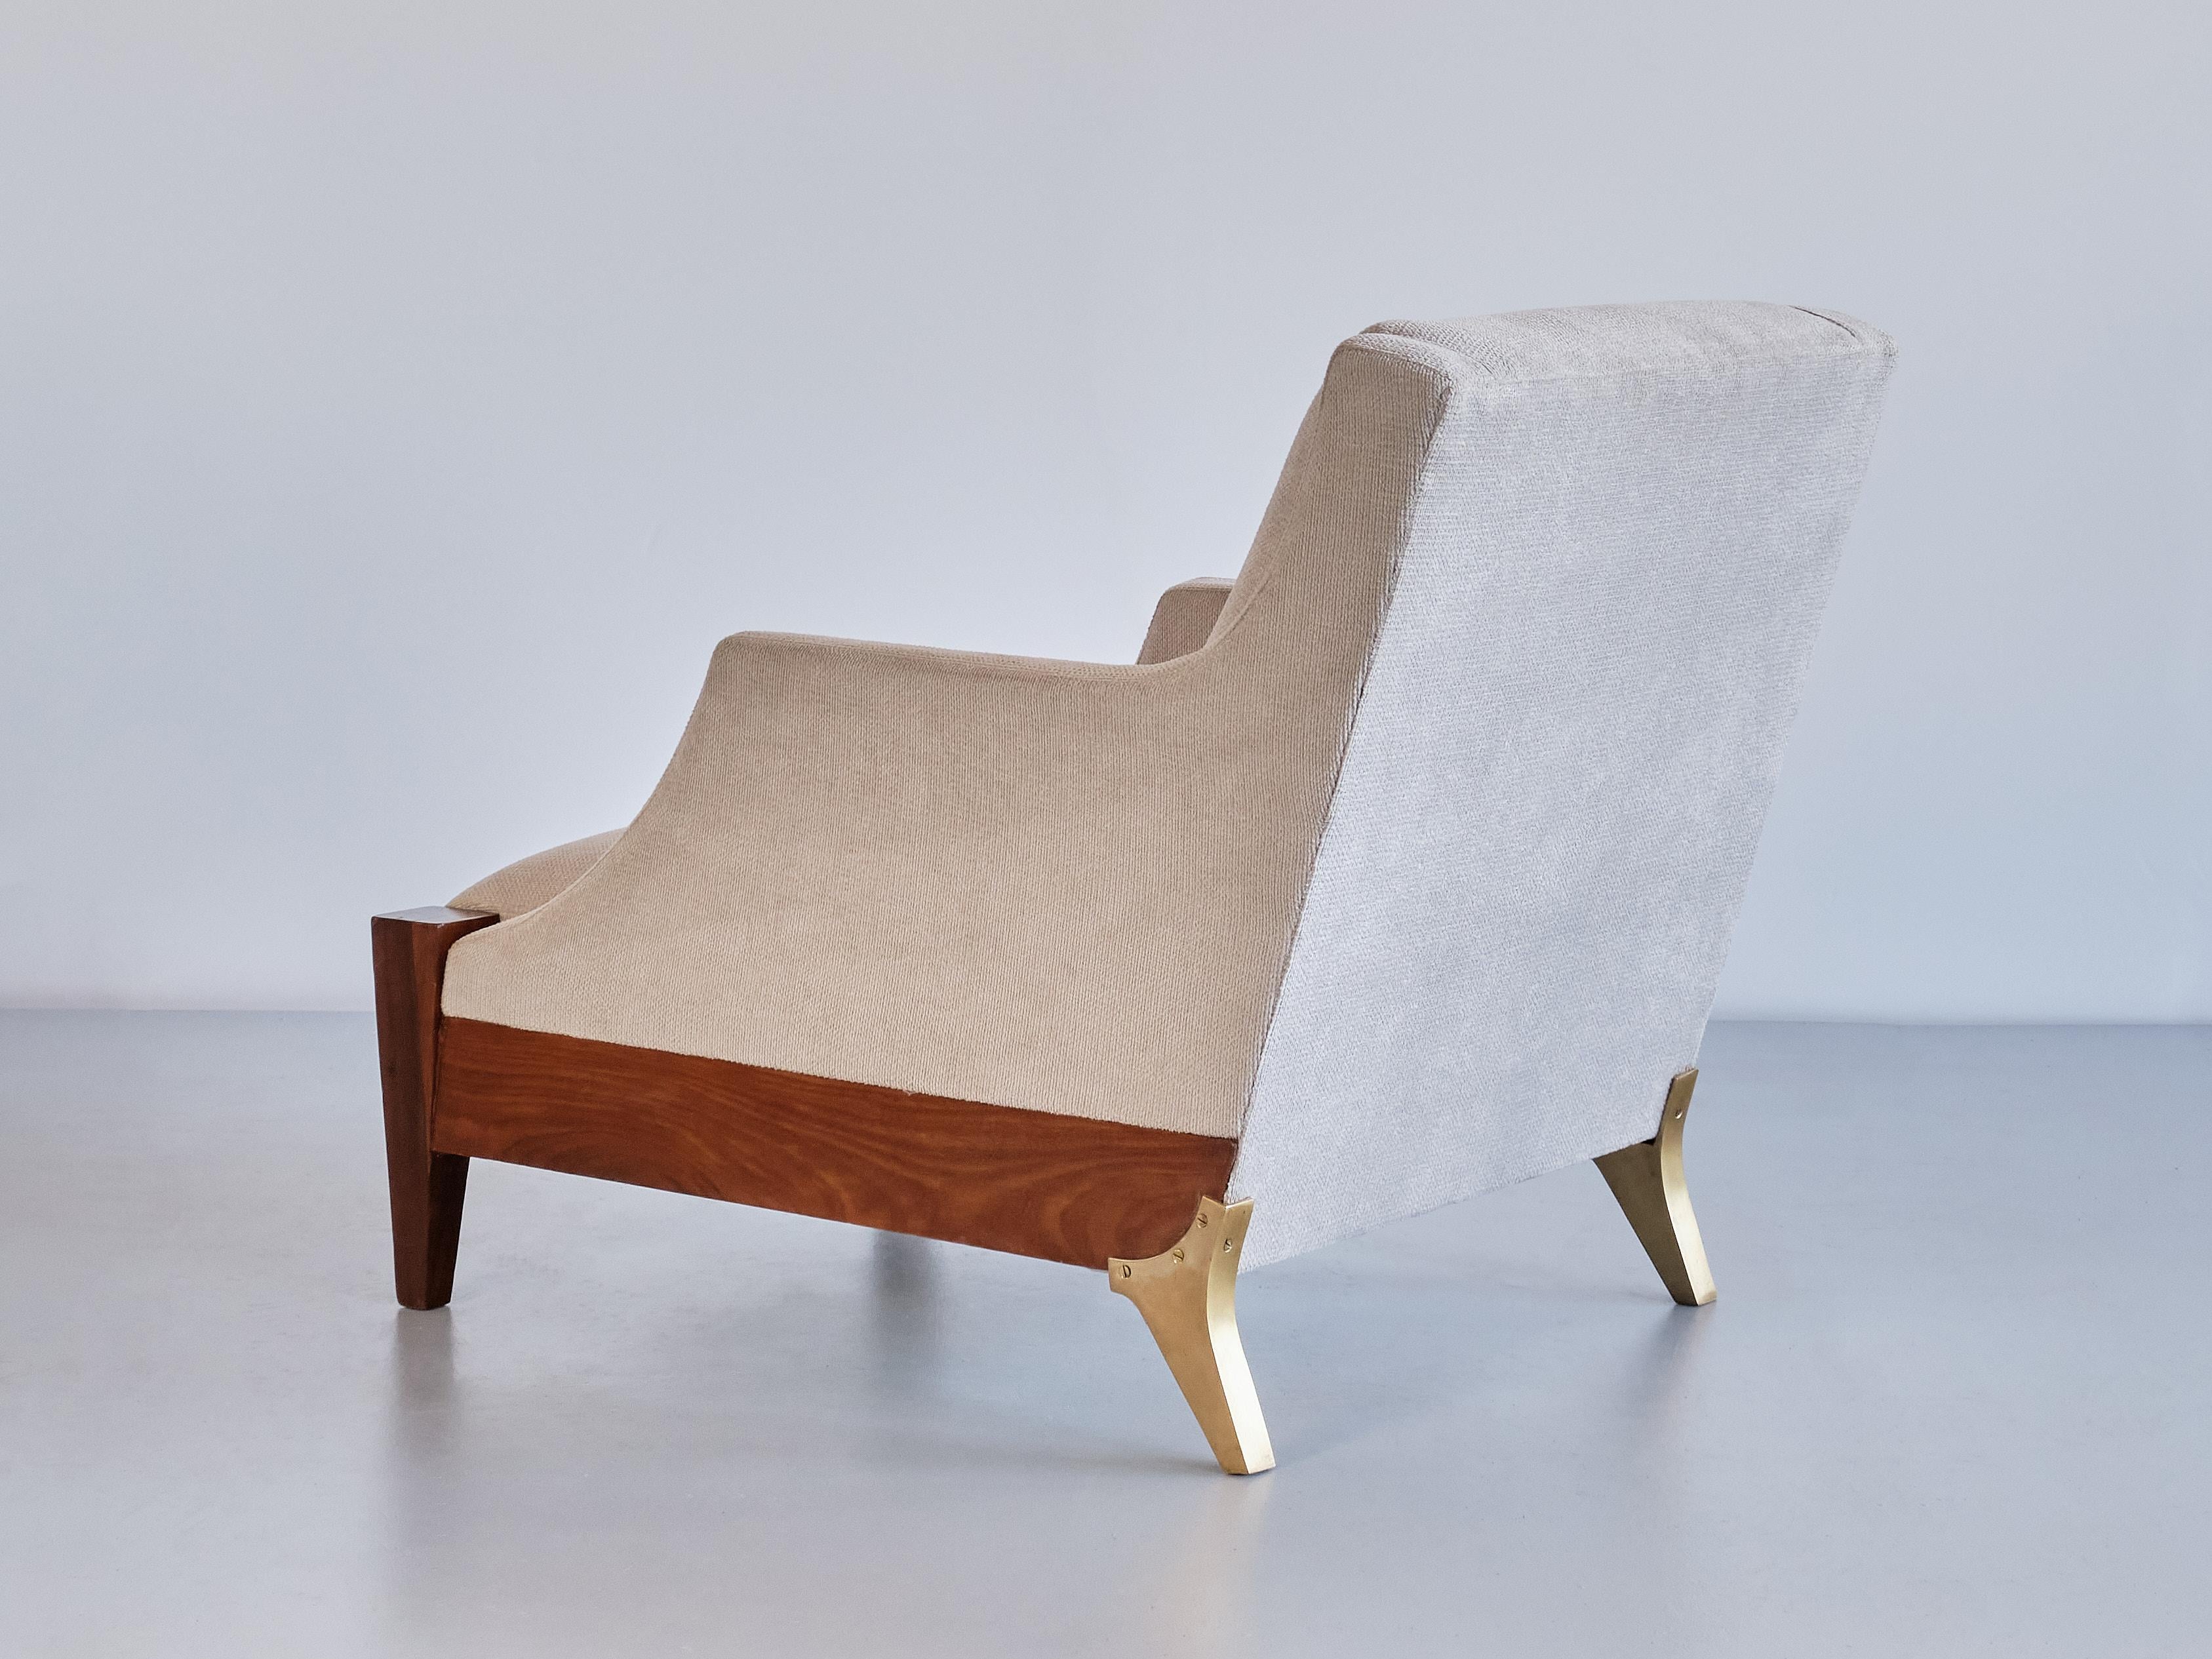 Pair of Melchiorre Bega Armchairs in Walnut, Brass, Ivory Fabric, Italy, 1940s 3